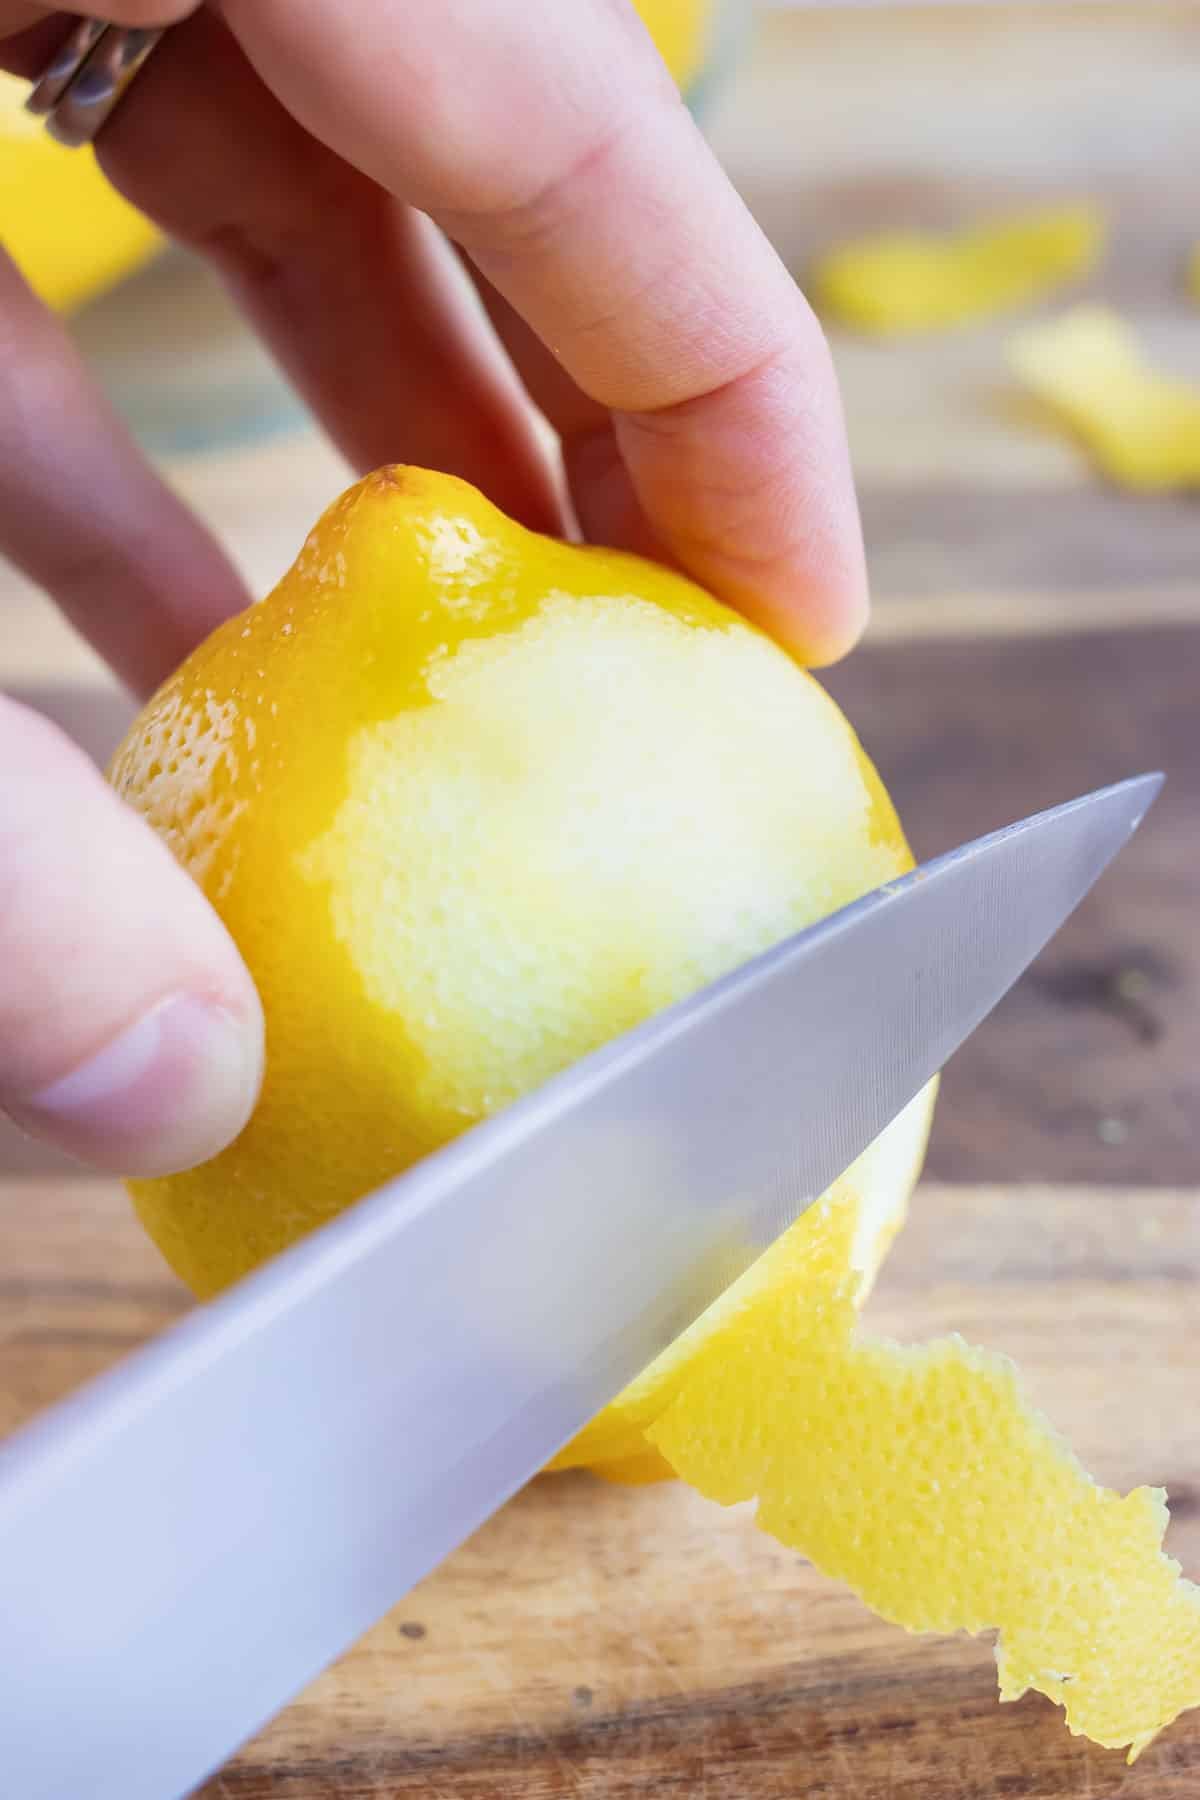 A hand with a paring knife carefully showing how to zest a lemon.